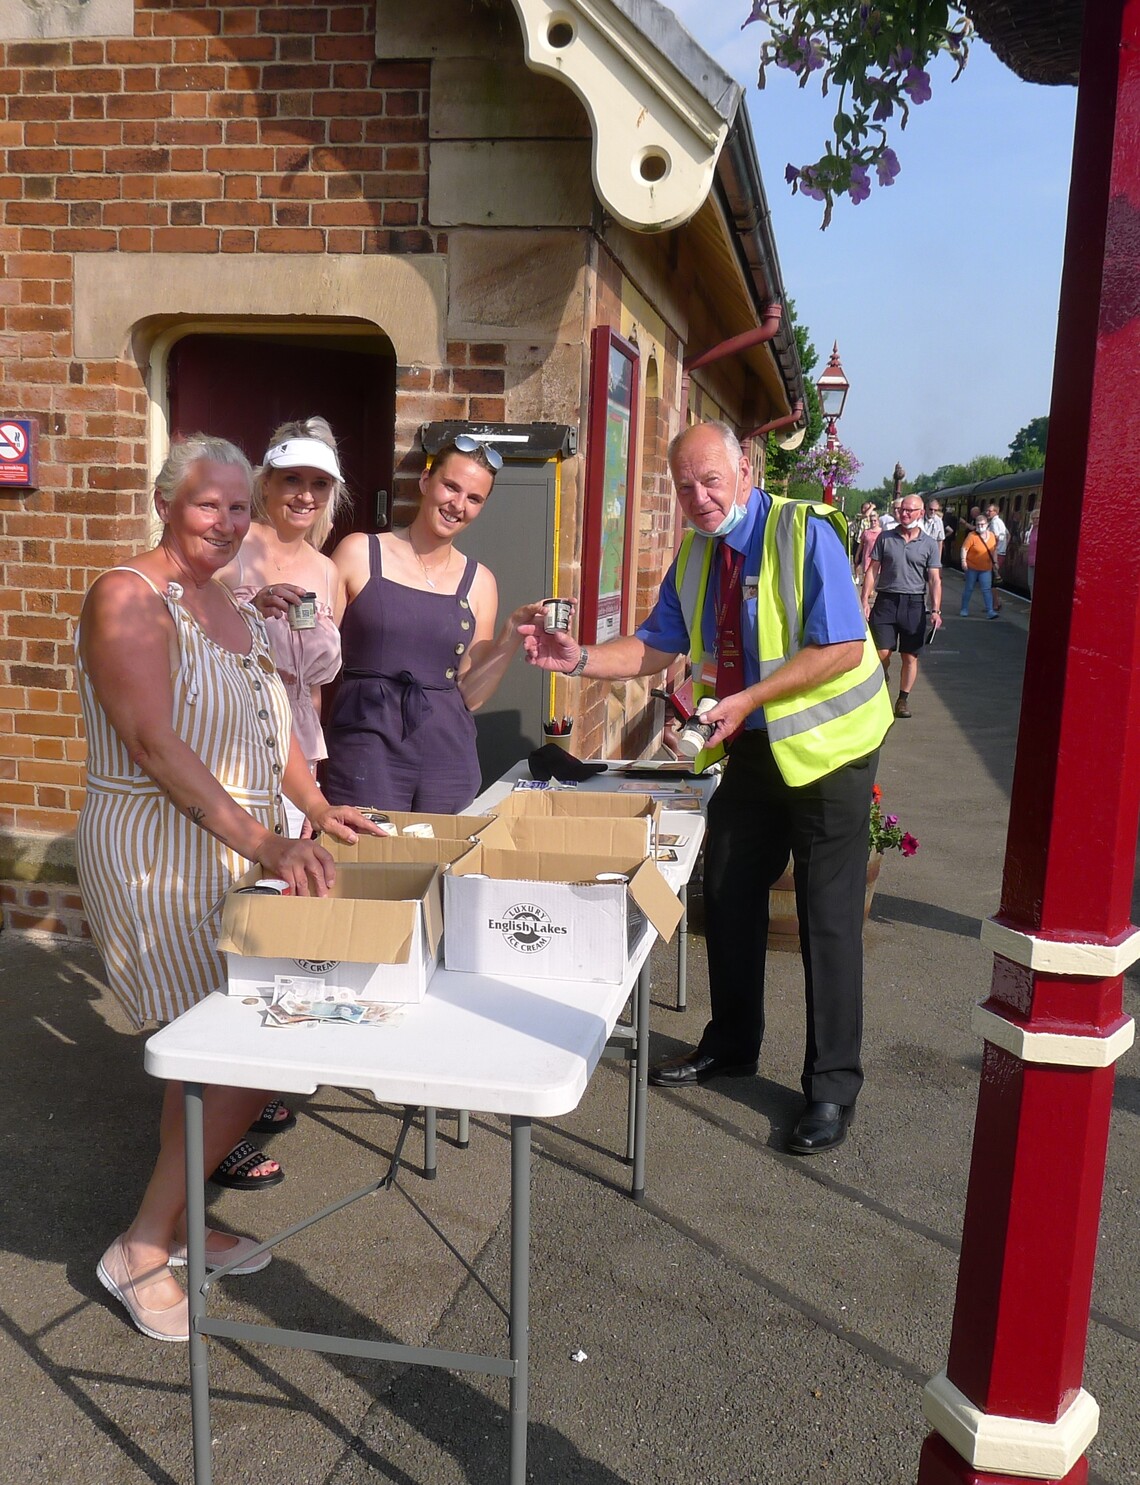 Appleby Railway pop up ice cream stall for charter trains